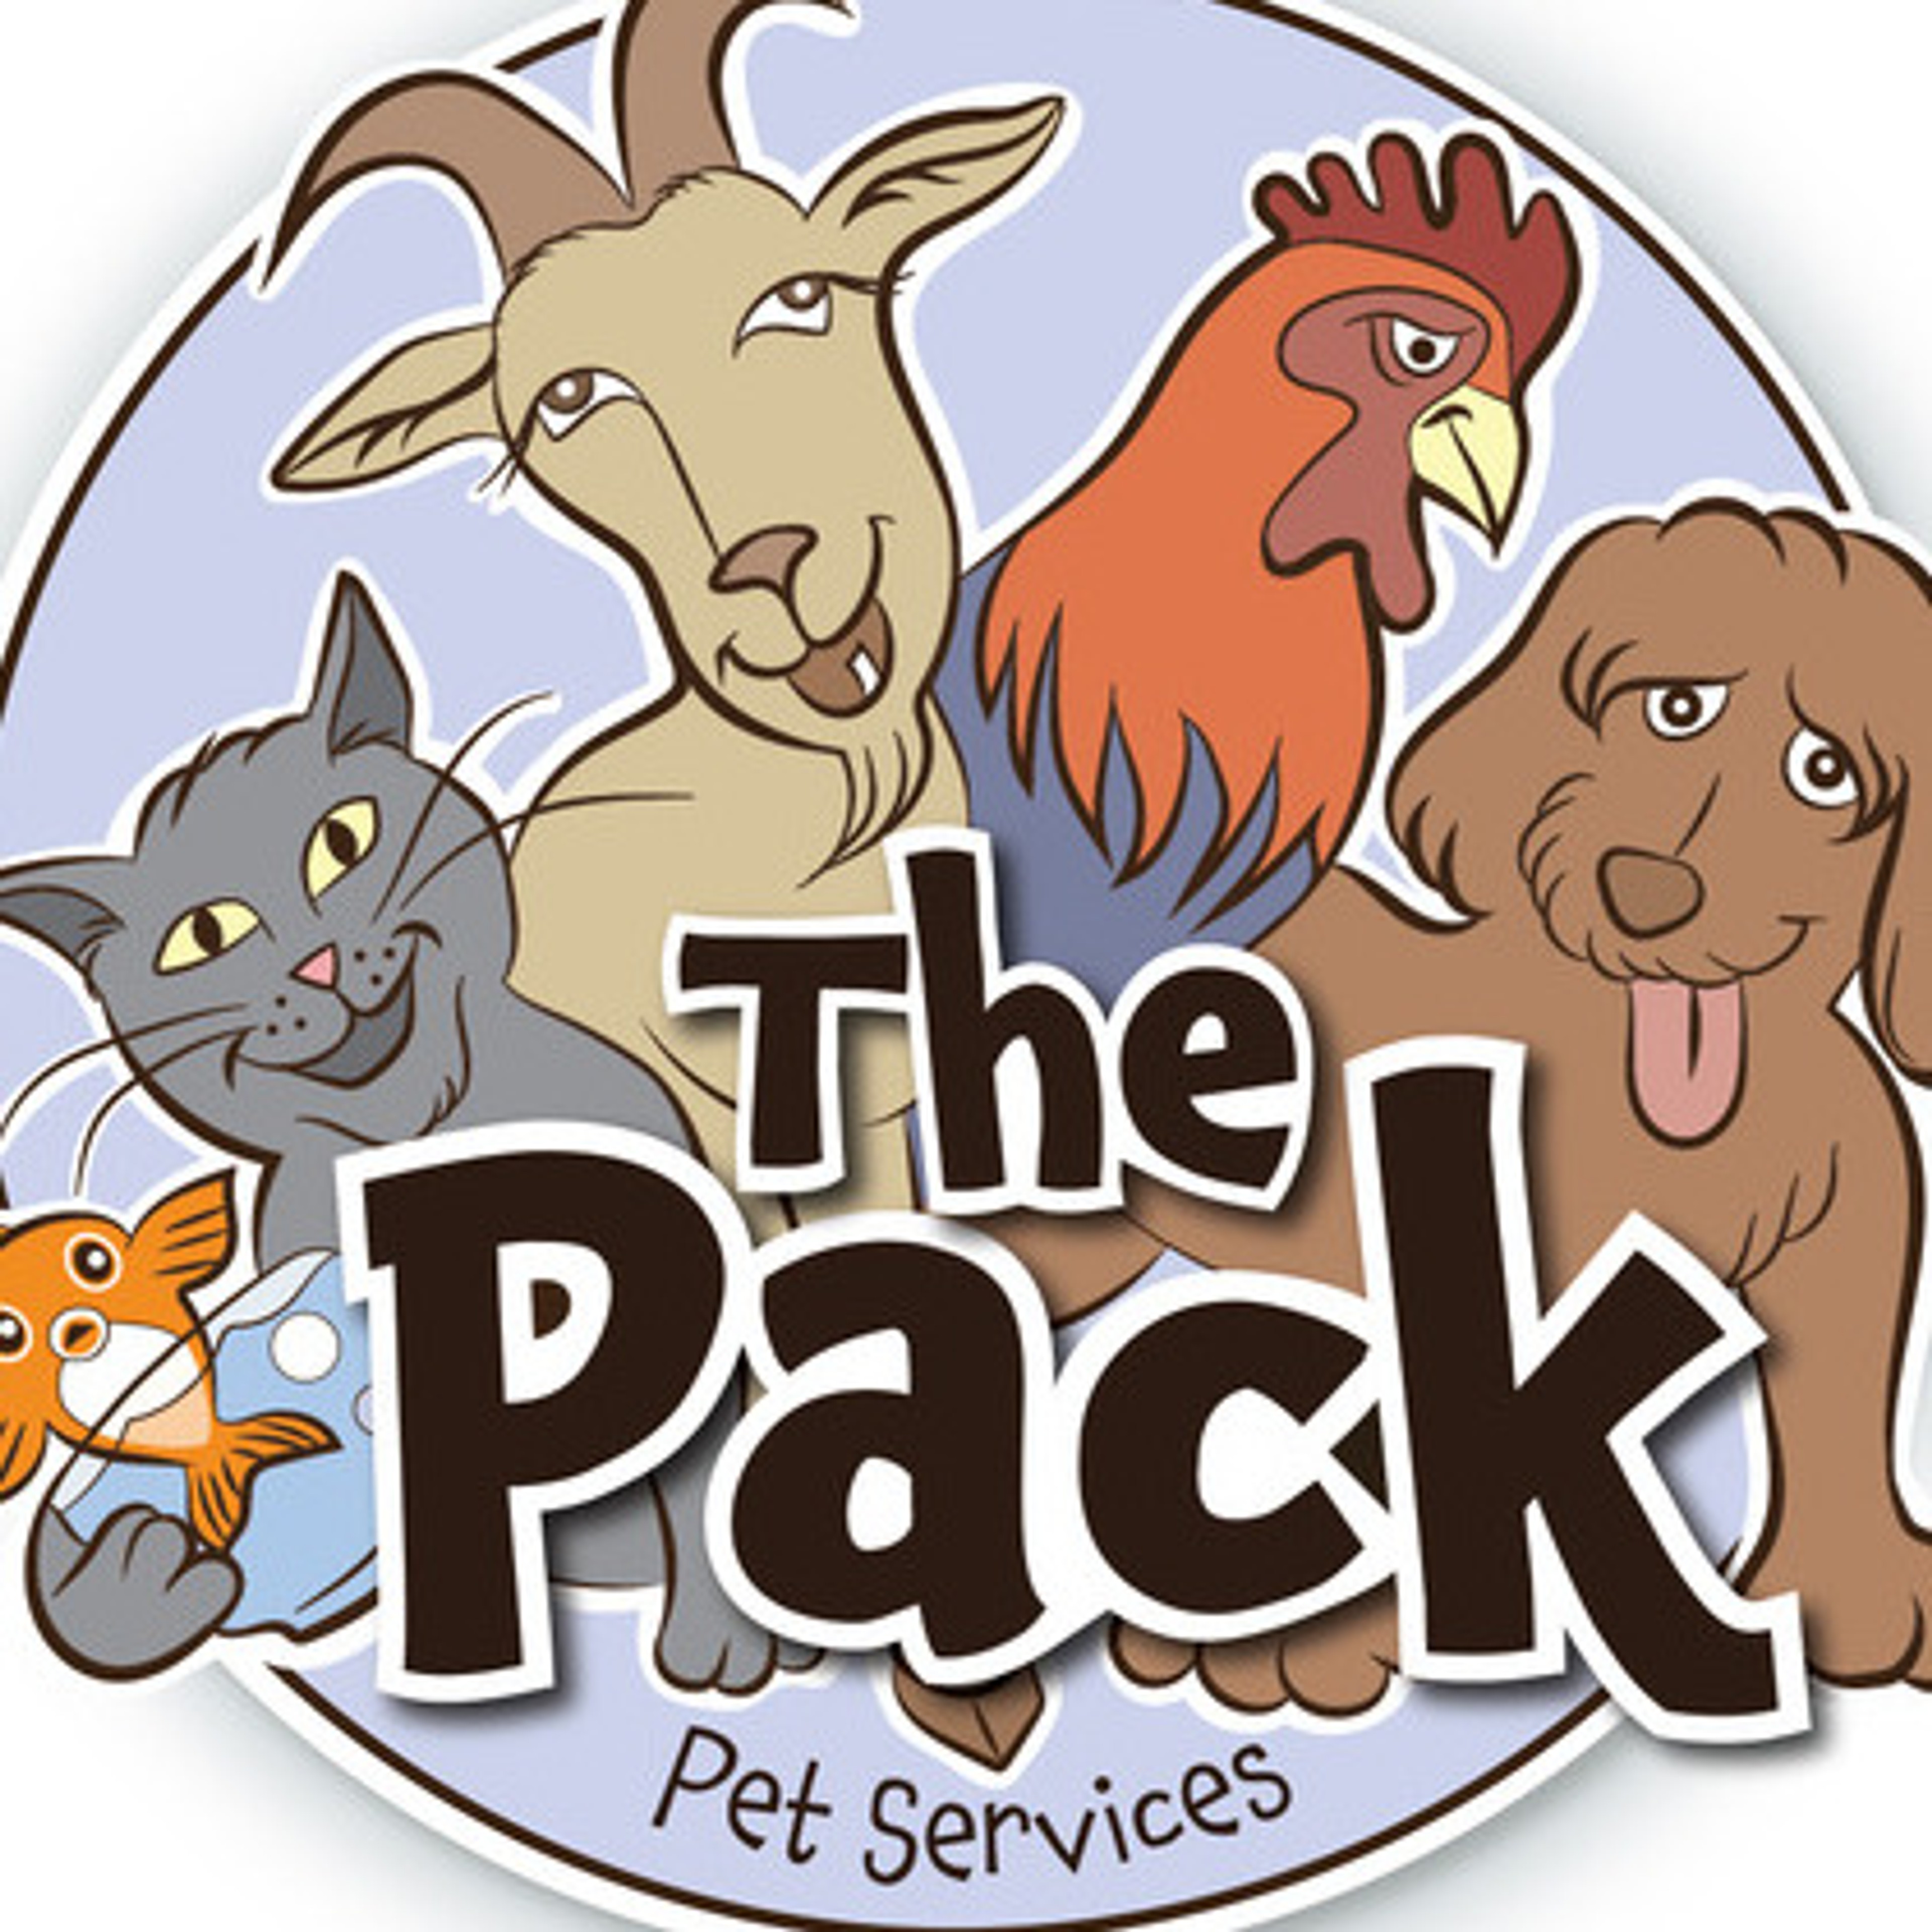 Hi I’m Julie, owner of ‘The Pack Pet Services’ and I would love to welcome you to the pack!